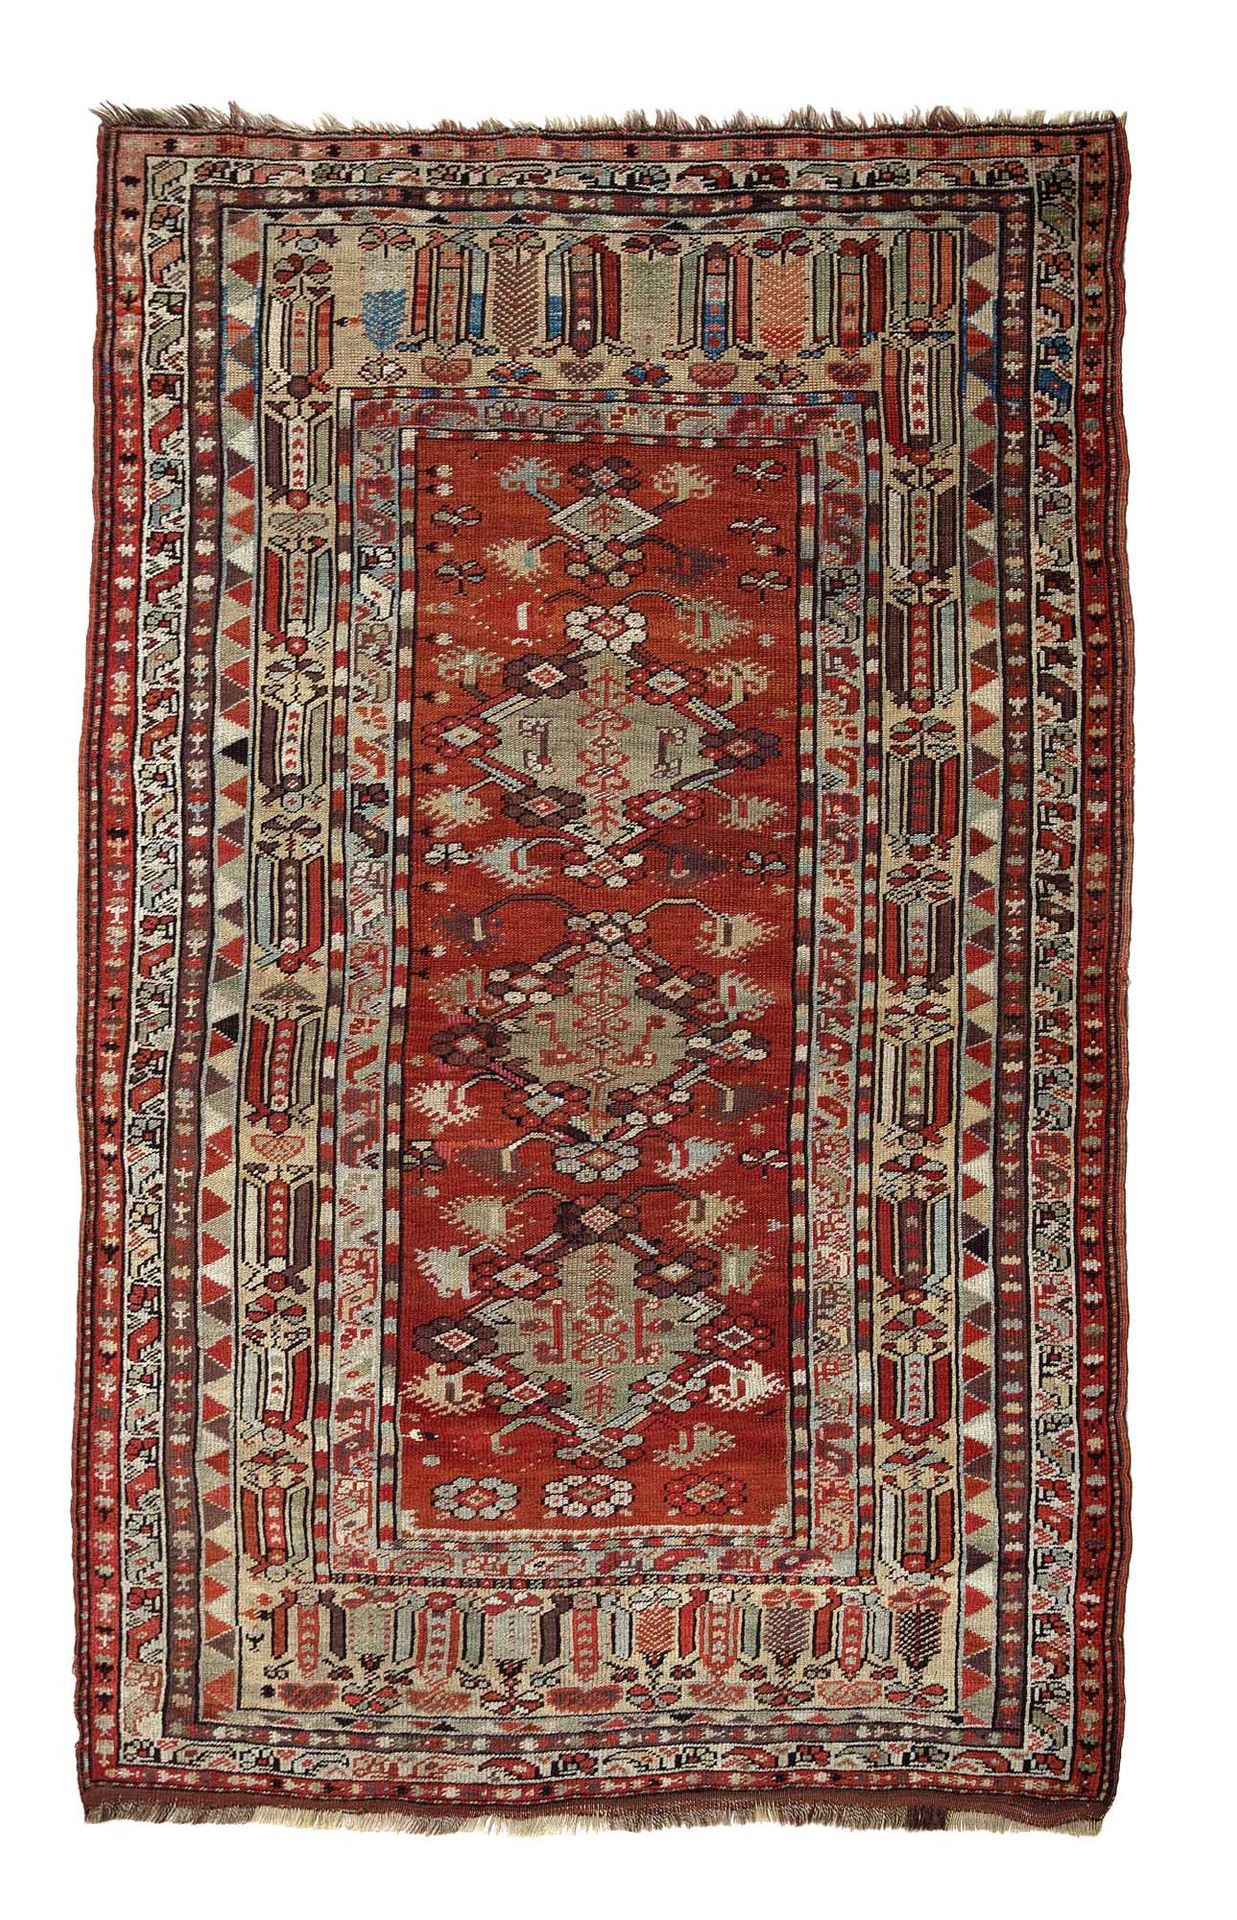 Null Melas carpet (Asia Minor), end of the 19th century

Dimensions : 160 x 110c&hellip;